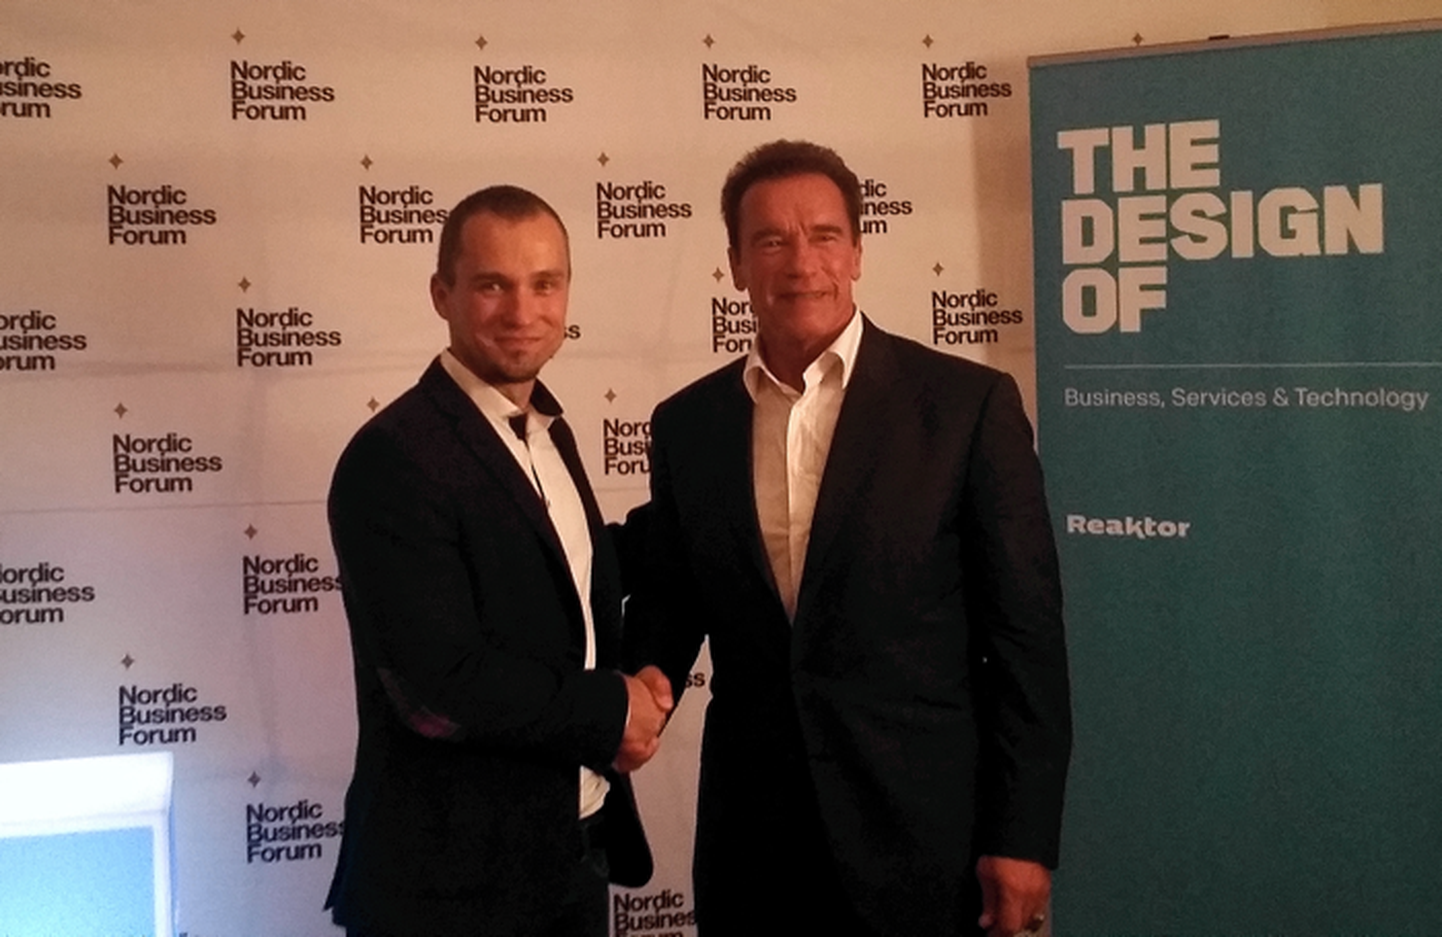 Arnold Schwarzenegger shared his five rules for success: find a vision, think big, ignore nay-sayers, work your ass off, give back. Don’t have enough time? “Sleep faster”, Arnold advised. After his talk I had the chance to meet Arnold and pose in a photo with him.